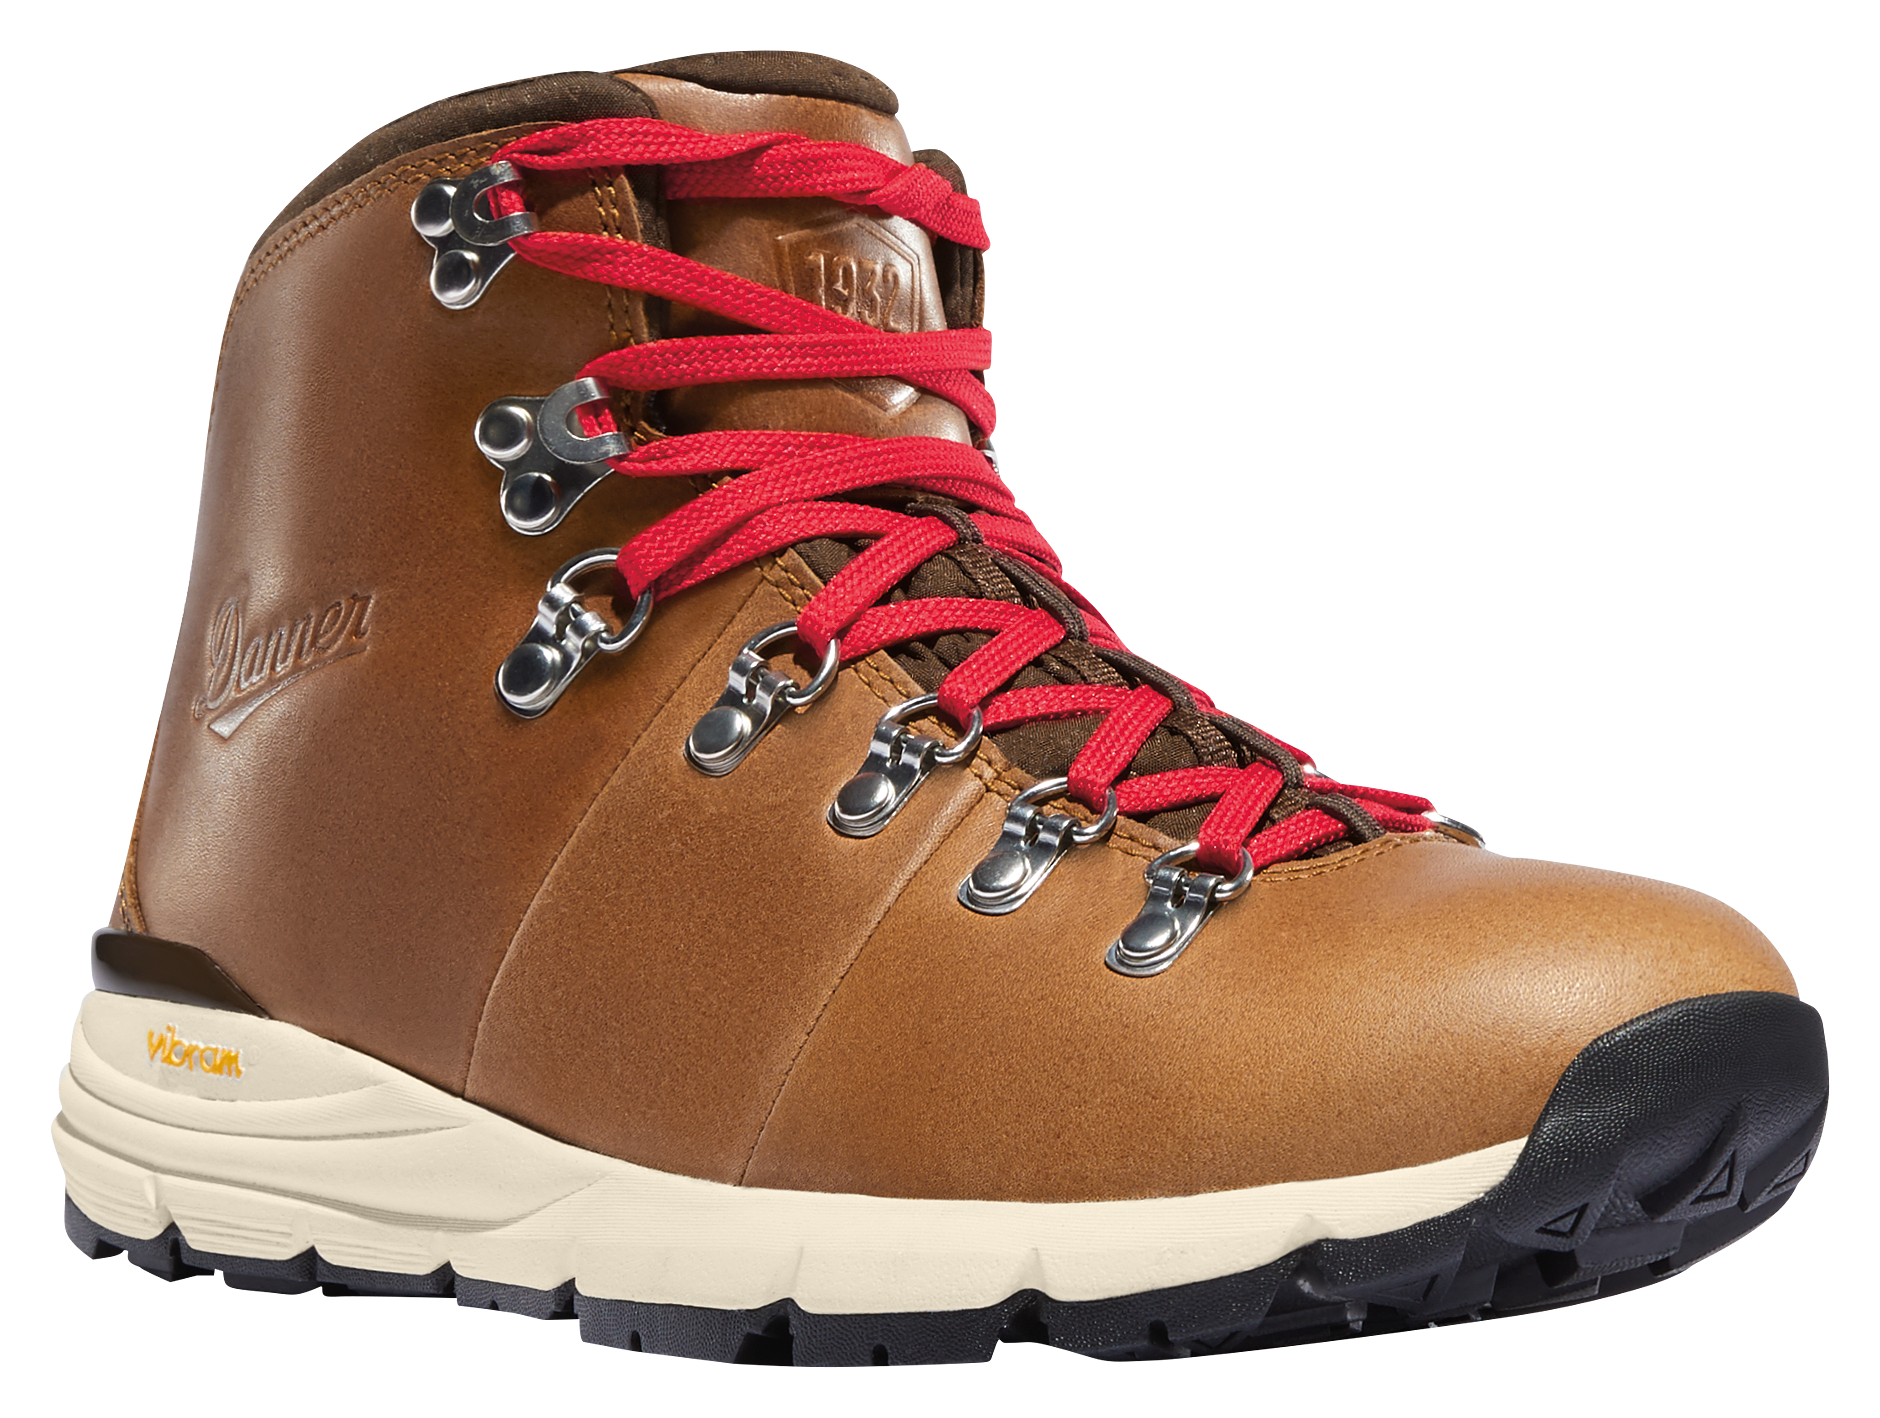 Danner Mountain 600 Leather Waterproof Hiking Boots for Ladies - Saddle Tan - 7.5M